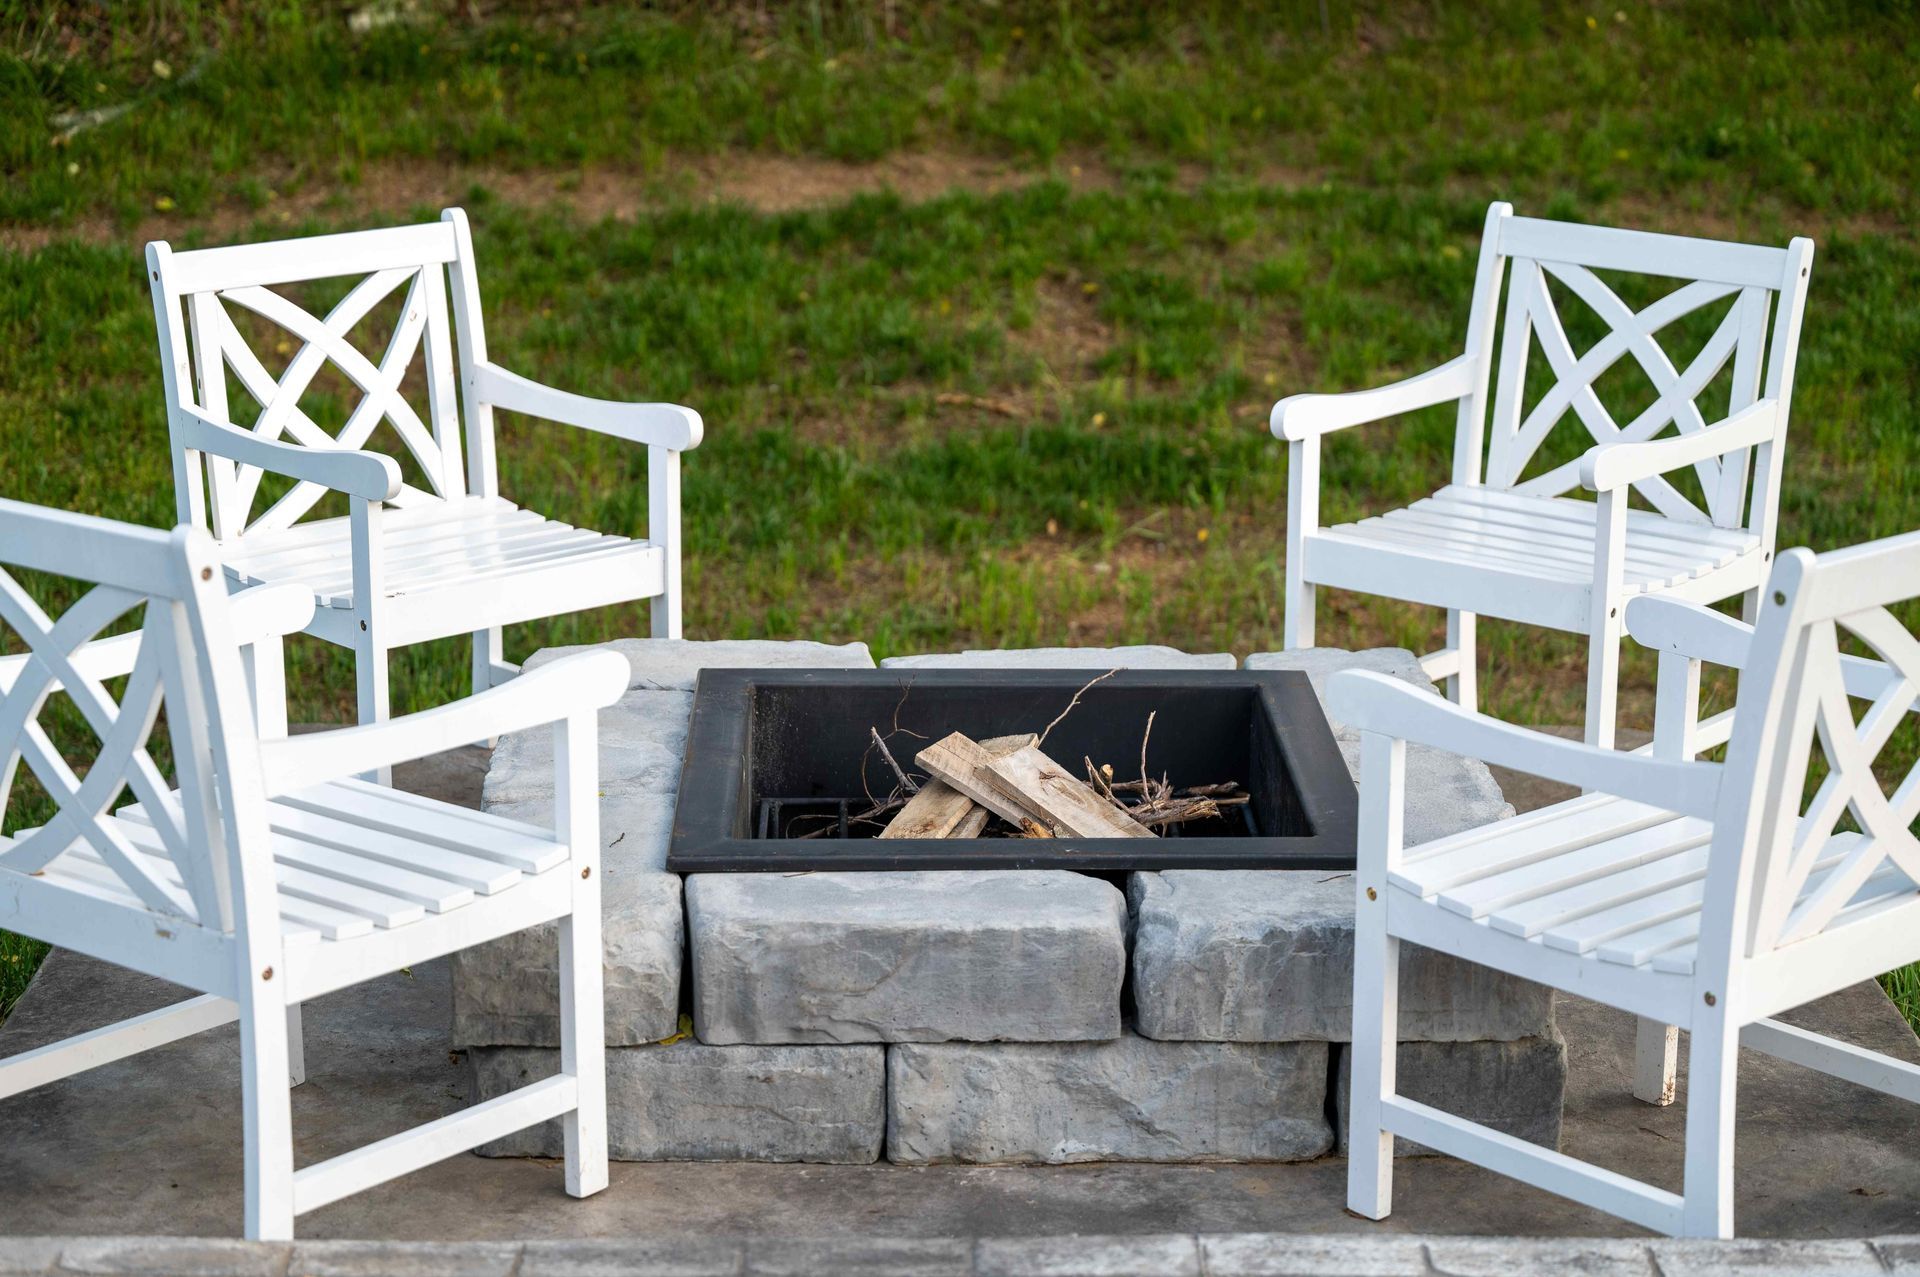 natural stone fire pit with steel frame insert